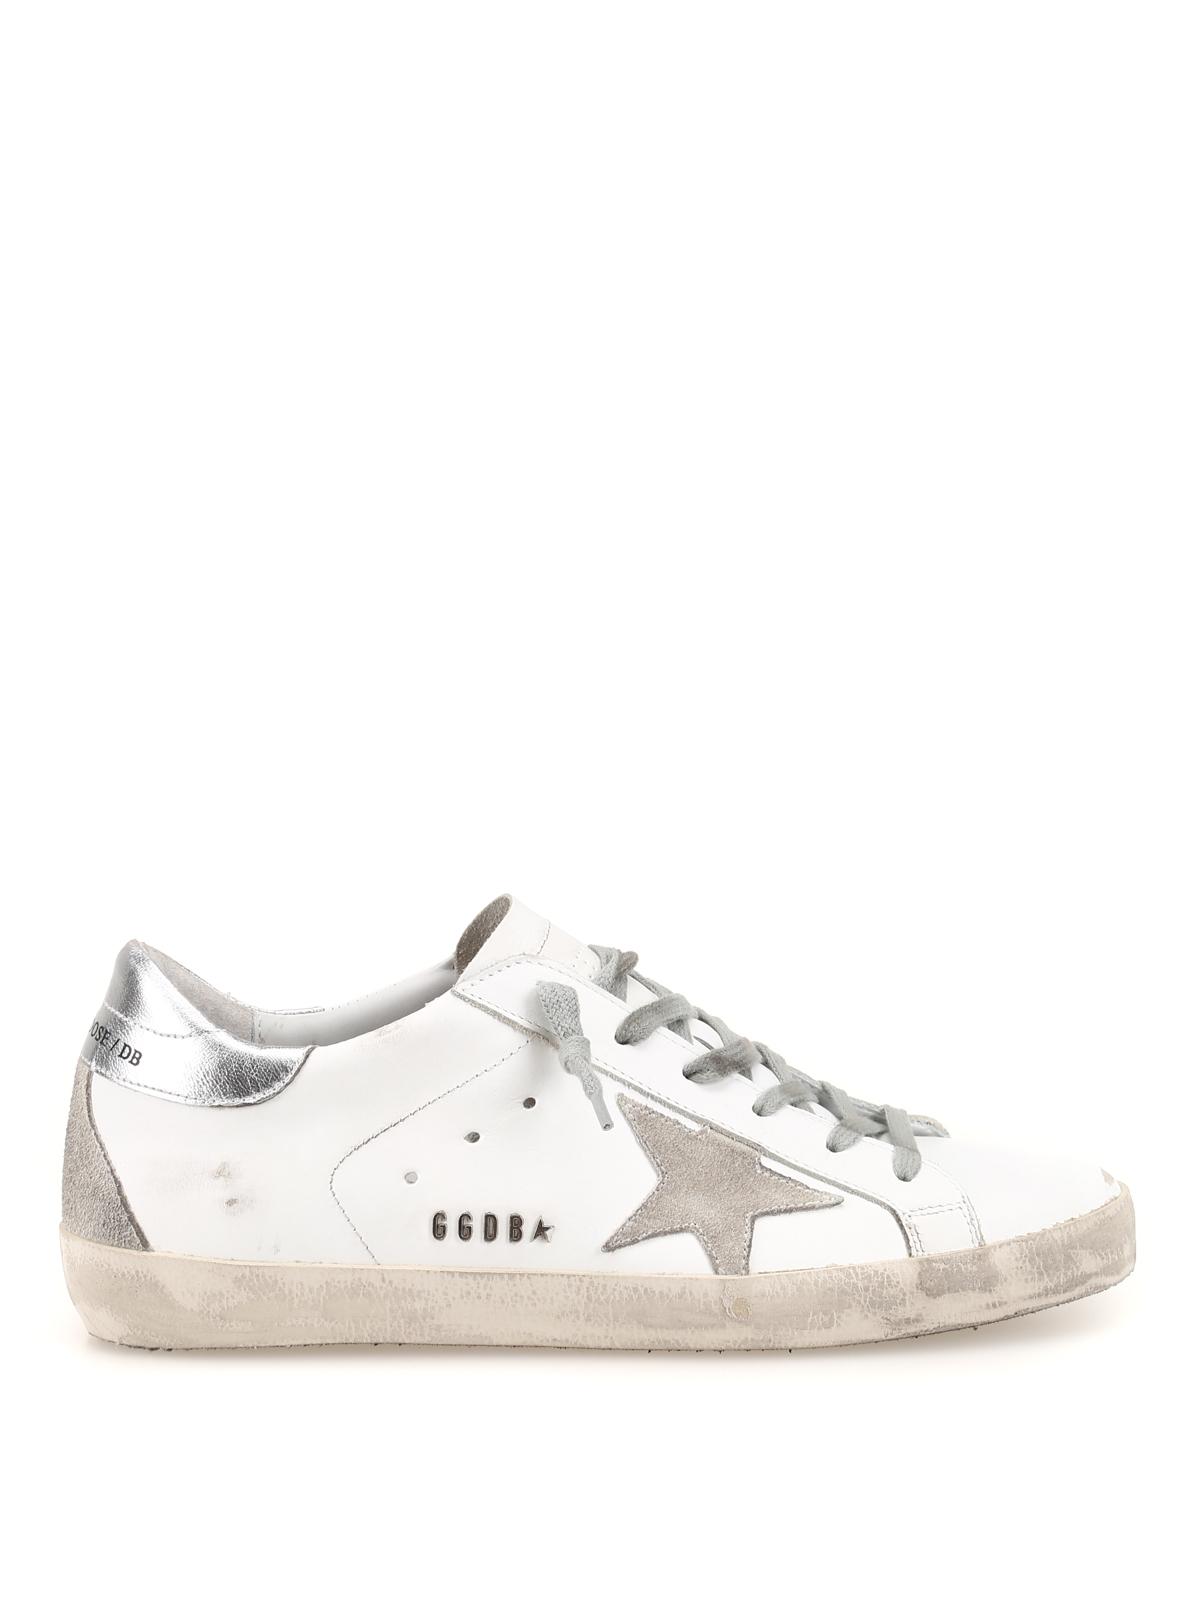 Golden Goose Deluxe Brand Leather White Superstar Sneakers With Metal ...